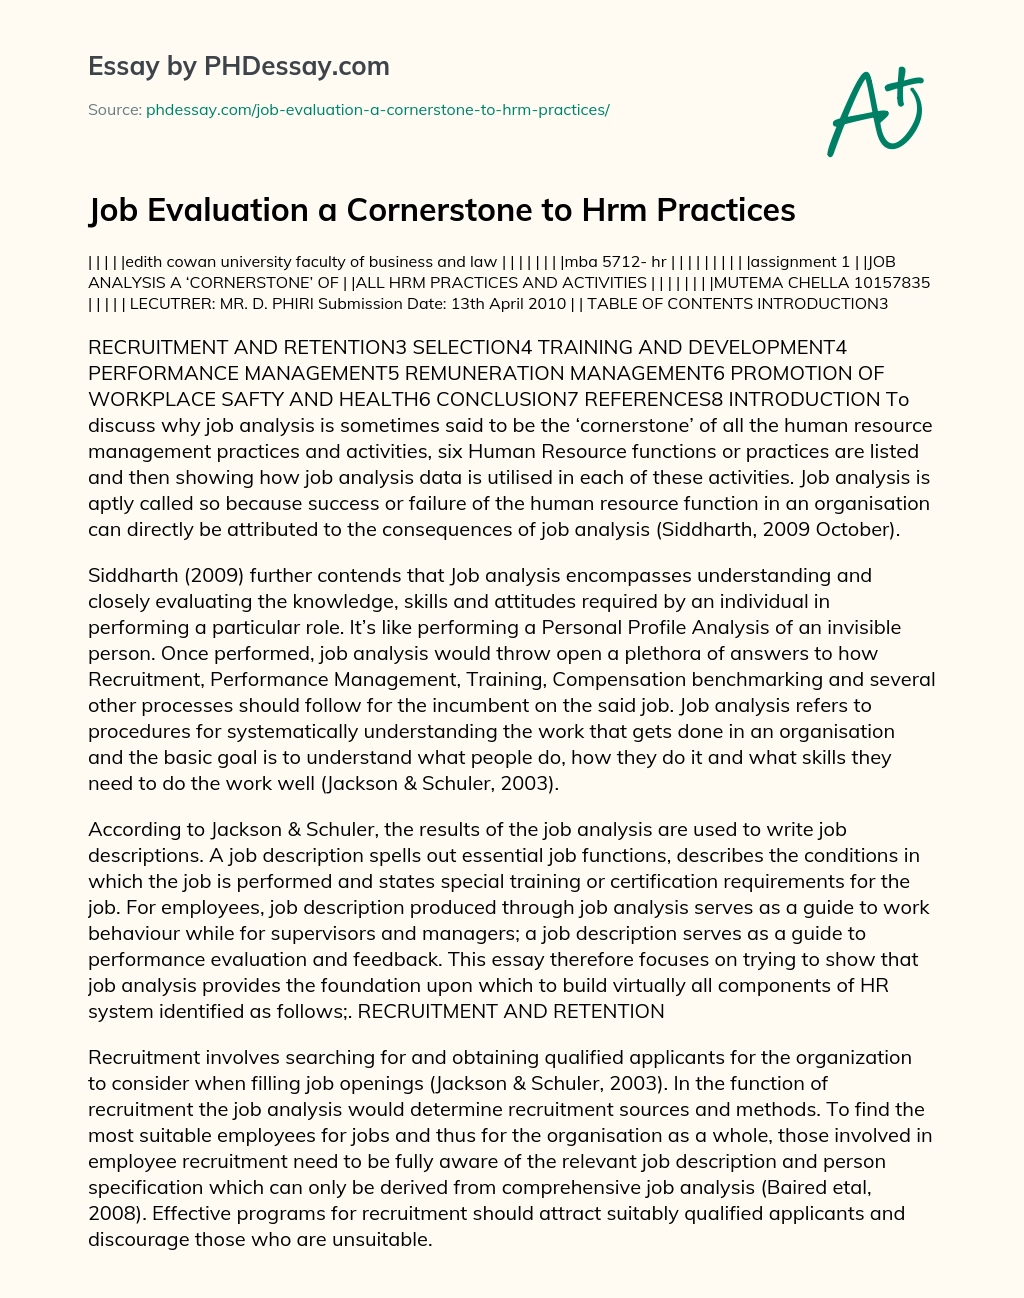 Job Evaluation a Cornerstone to Hrm Practices essay